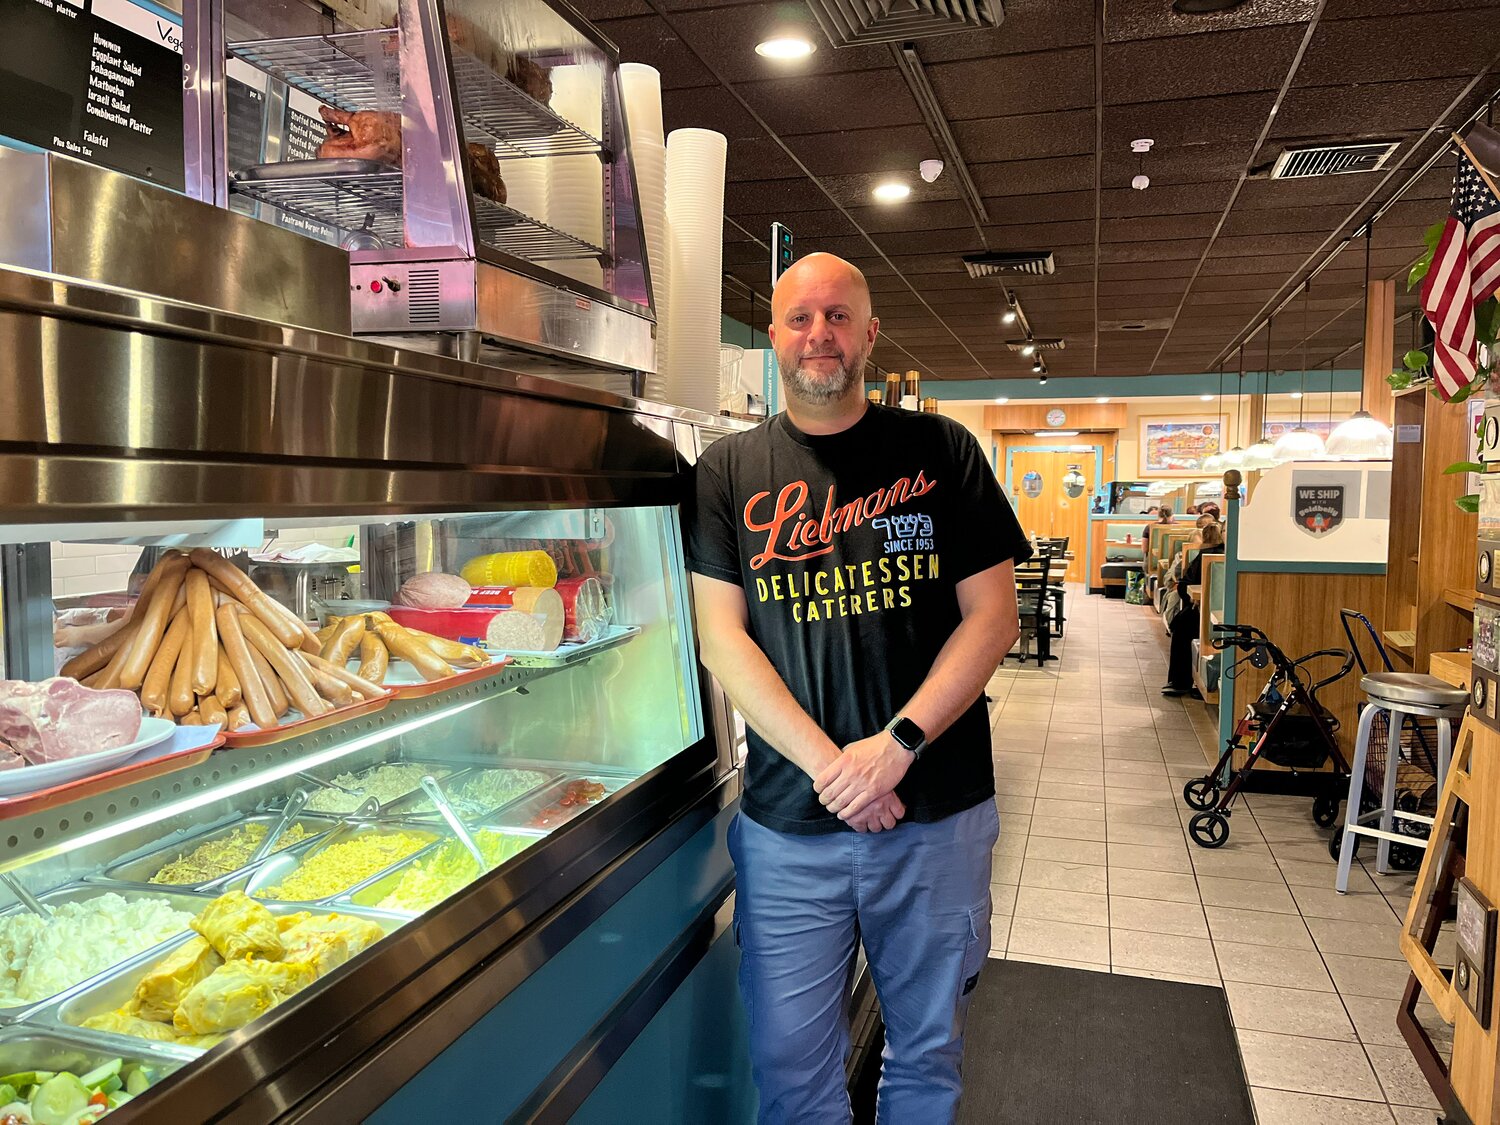 Yuval Dekel, owner of the famous Liebman's Deli in Riverdale, has announced plans to expand to Ardsley in nearby Westchester.